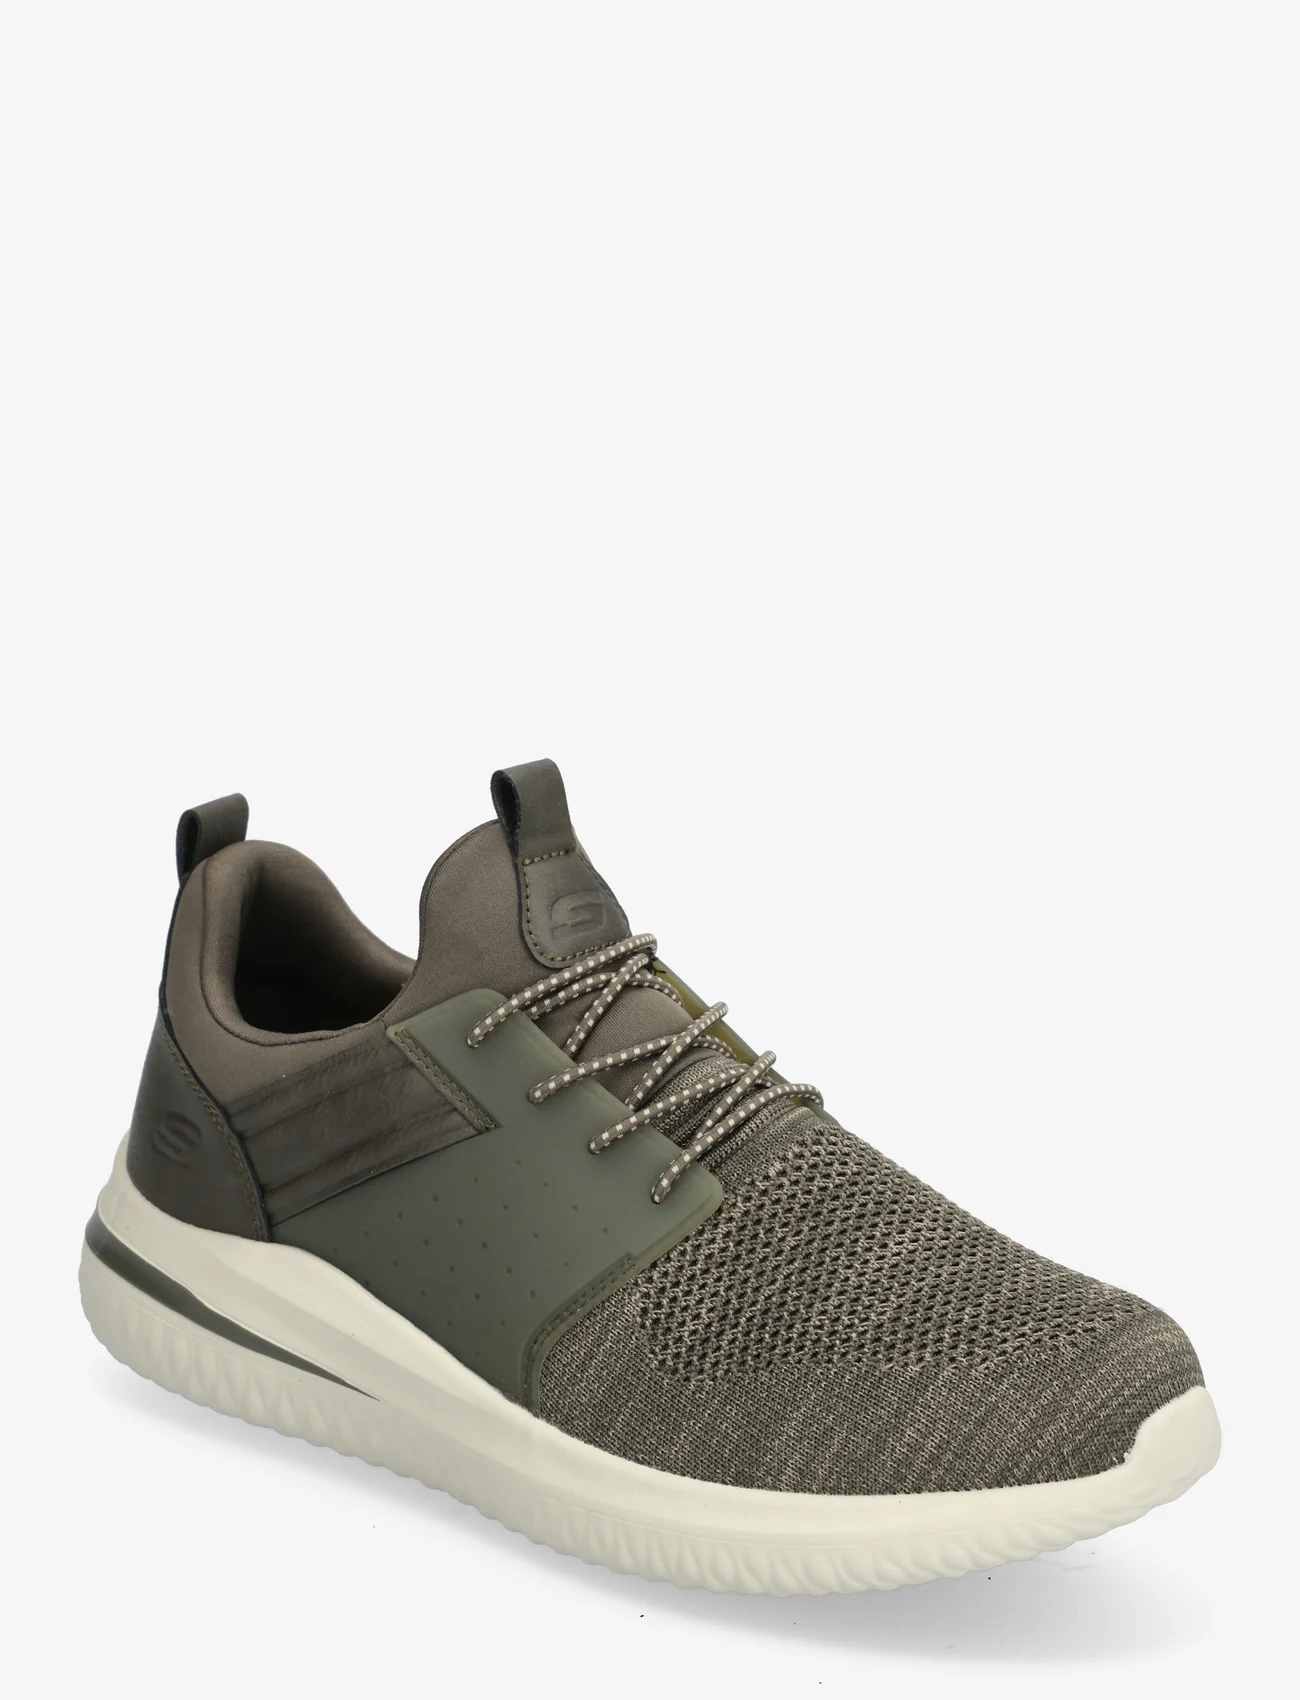 Skechers - Mens Delson 3.0 - Cicada - low tops - olv olive - 0